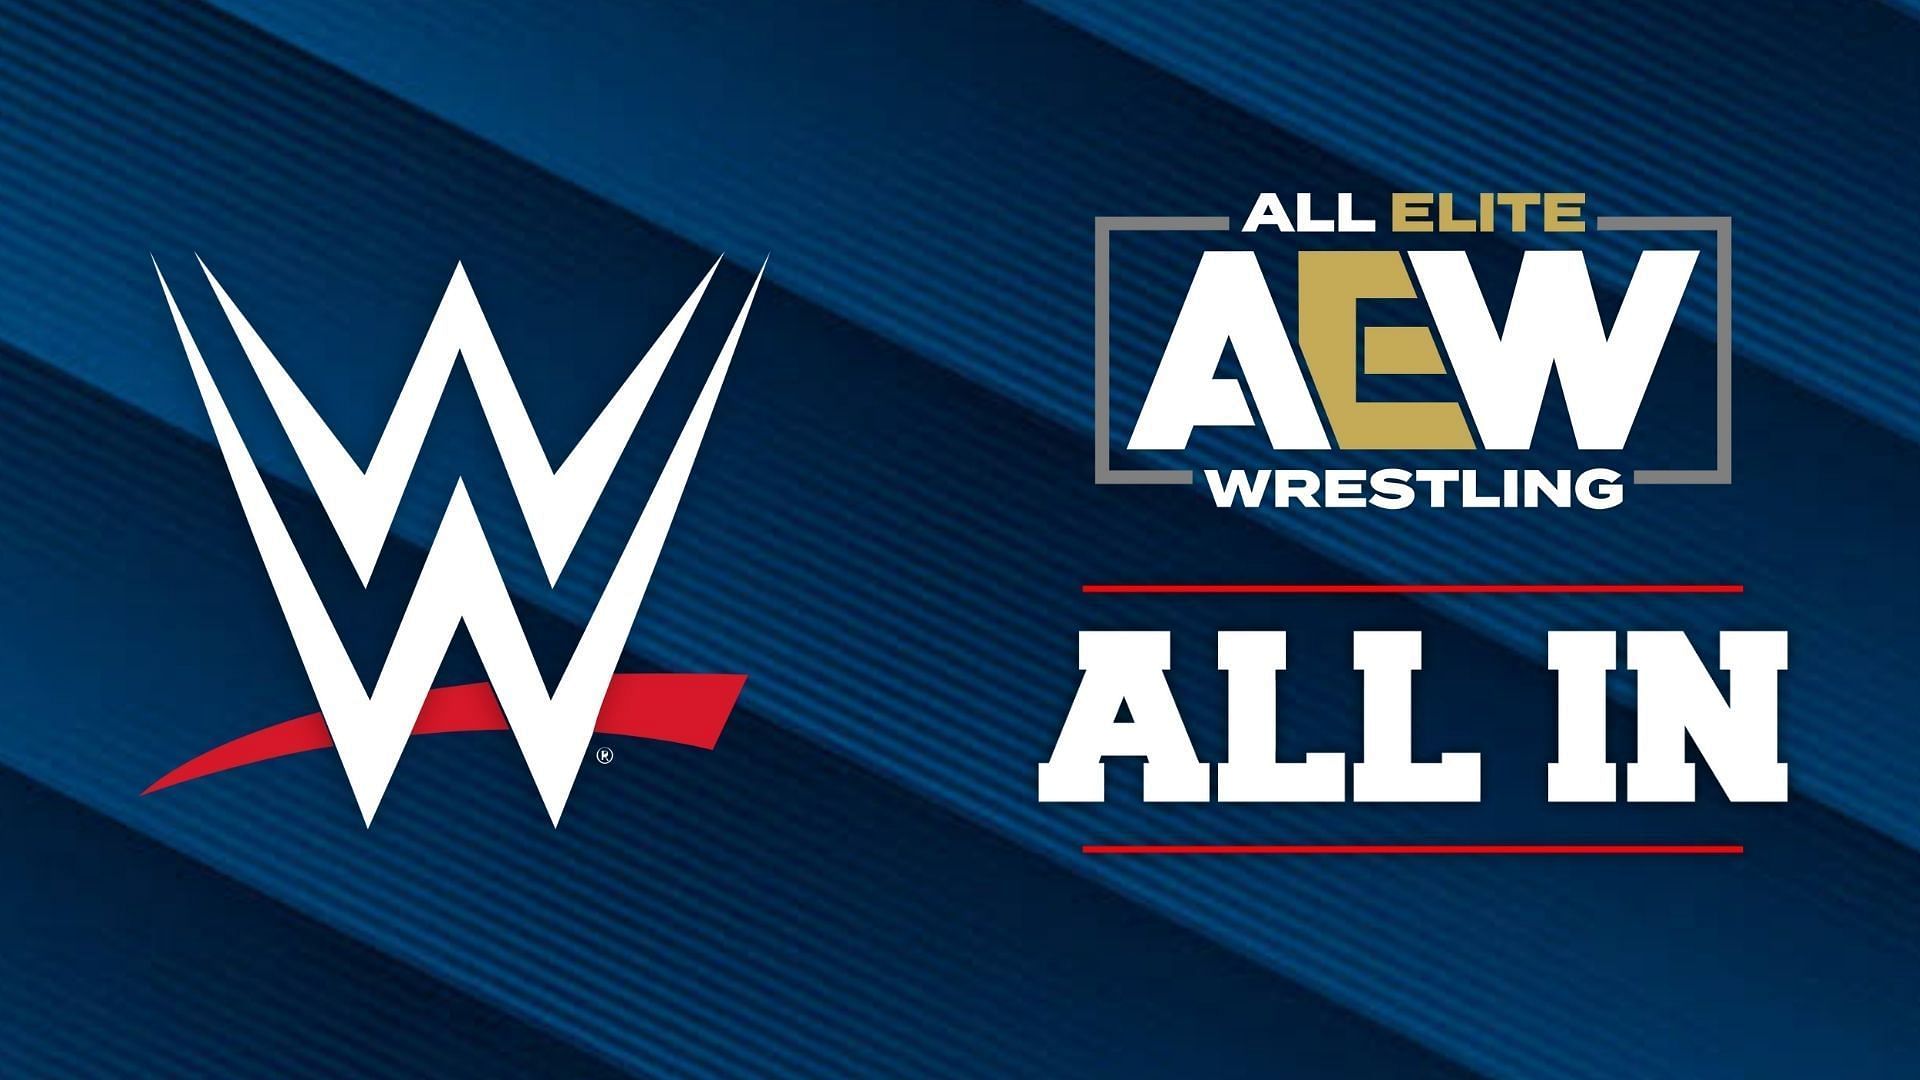 A former WWE name could appear at AEW All In this August.